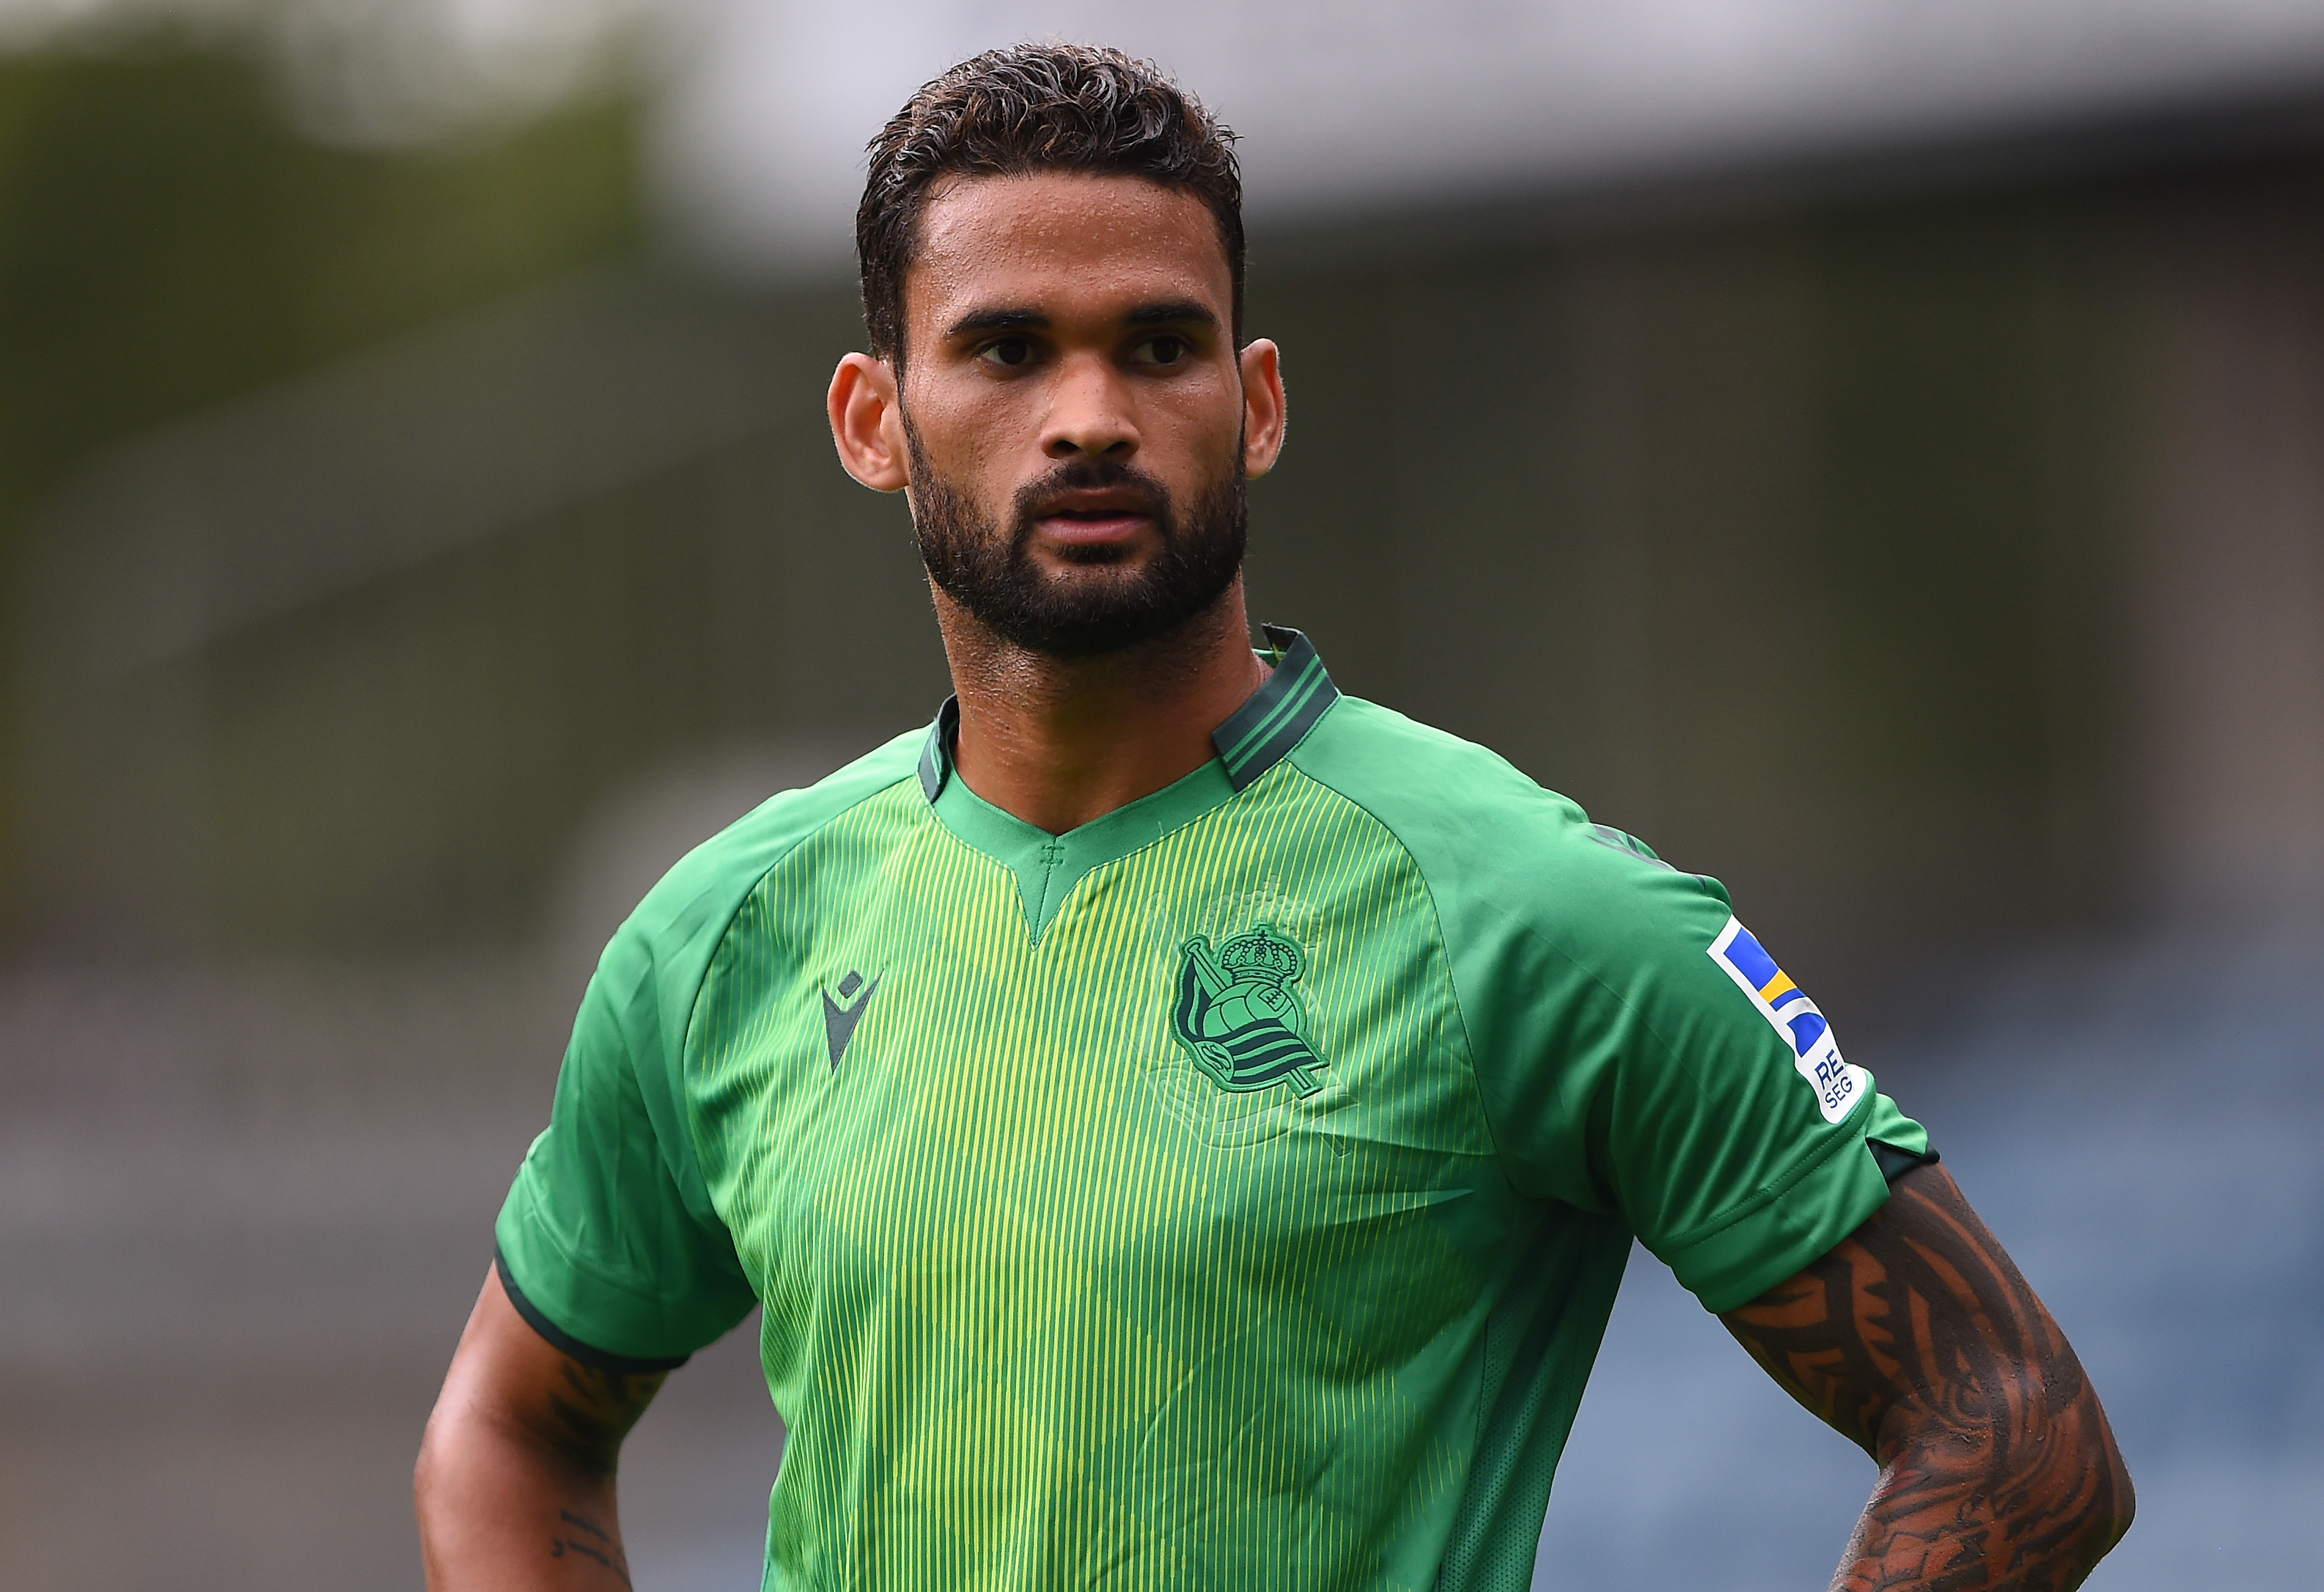 LONDON, ENGLAND - JULY 27: Willian Jose of Real Sociedad looks on during the Pre-Season Friendly between Millwall and Real Sociedad at The Den on July 27, 2019 in London, England. (Photo by Harriet Lander/Getty Images)